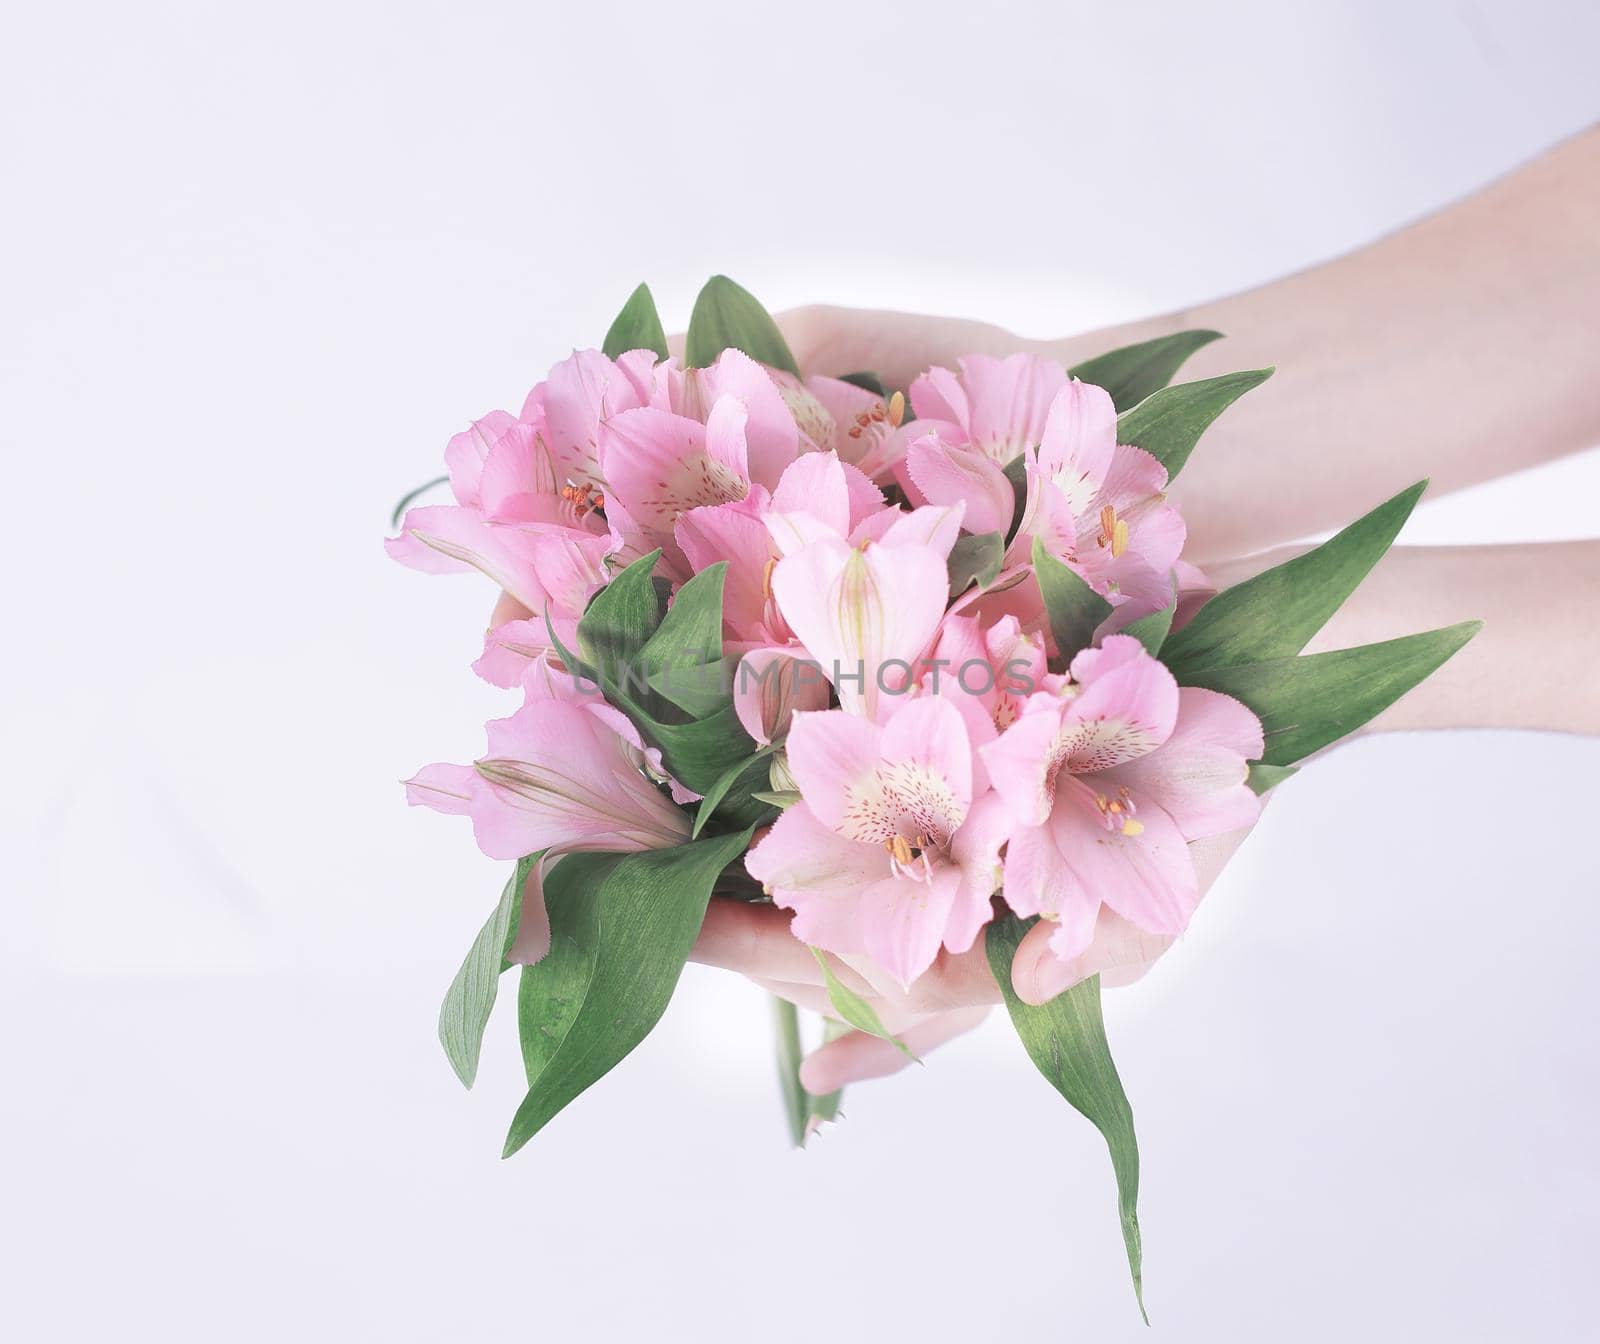 bouquet of flowers in female hands isolated on a light backgrou by SmartPhotoLab